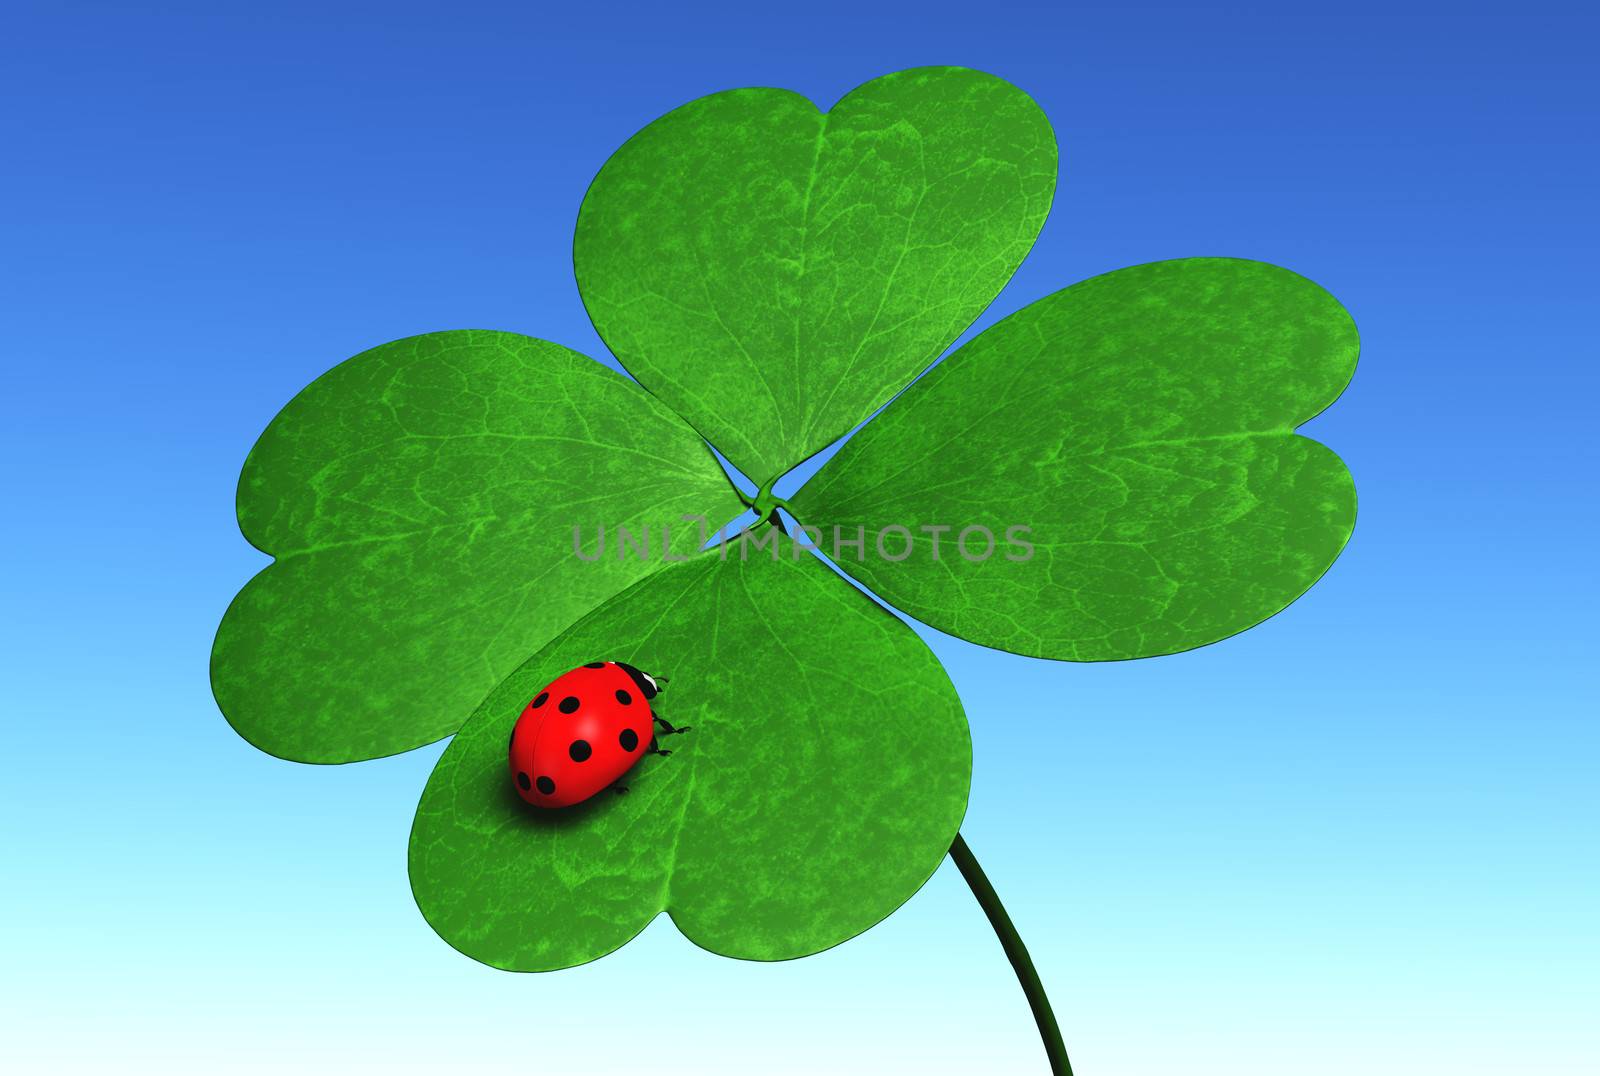 Ladybug on a four-leaves clover by TaiChesco